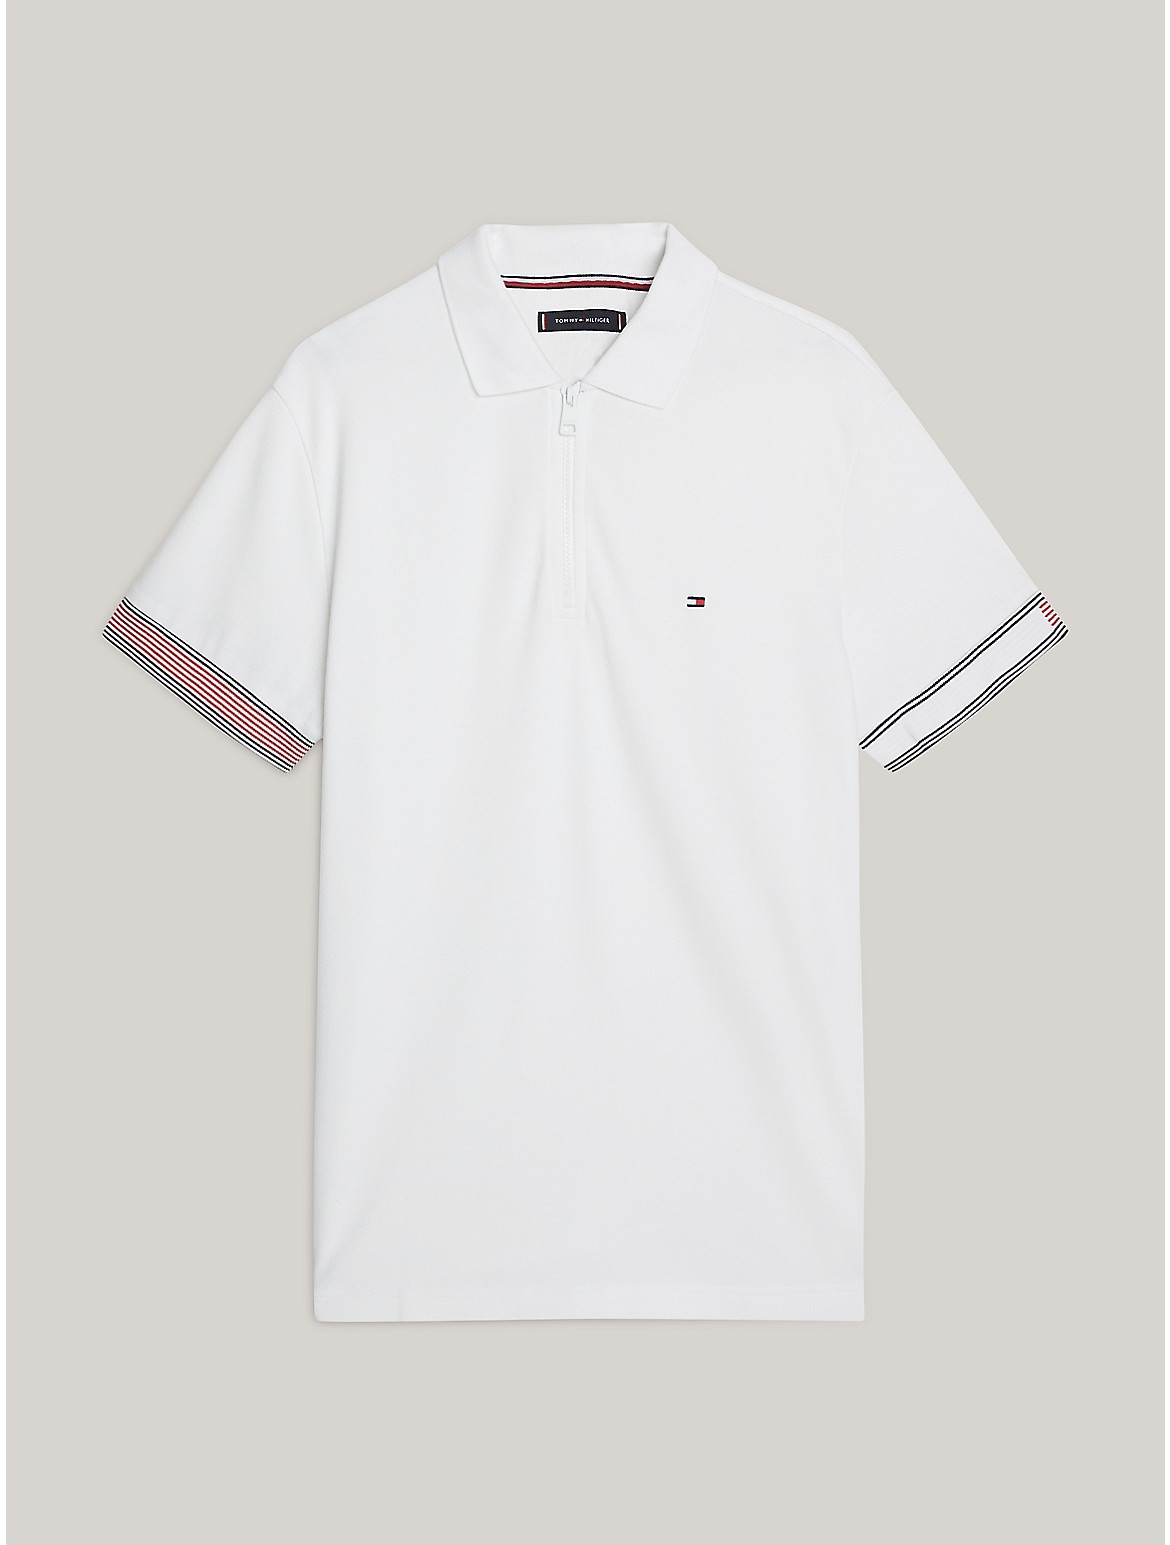 Tommy Hilfiger Slim Fit Flag Tipped Polo In White